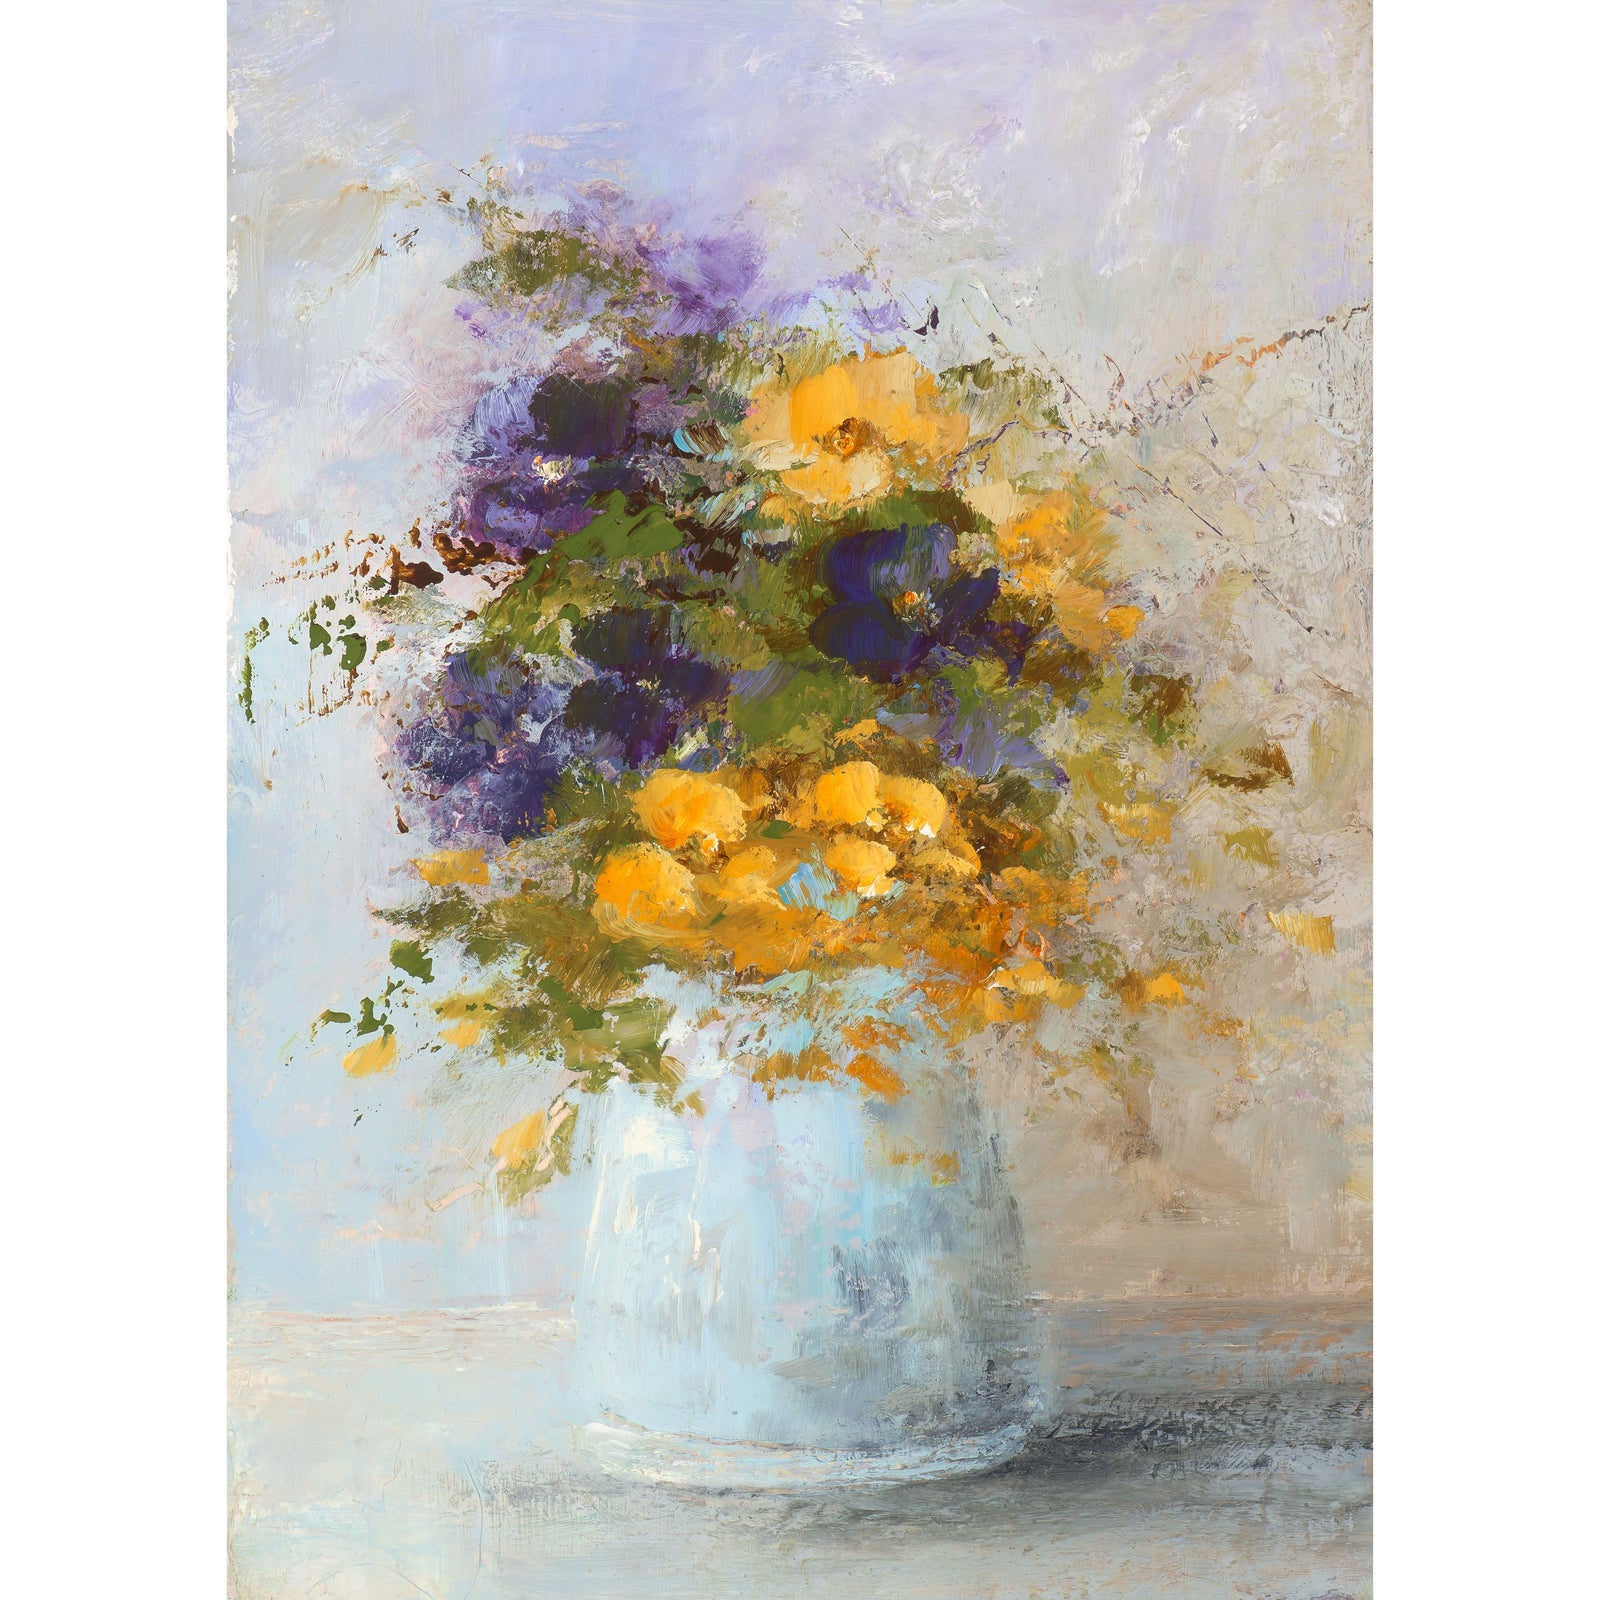 'Pansies From The Studio Garden' oil on canvas original by Amanda Hoskin, available at Padstow Gallery, Cornwall